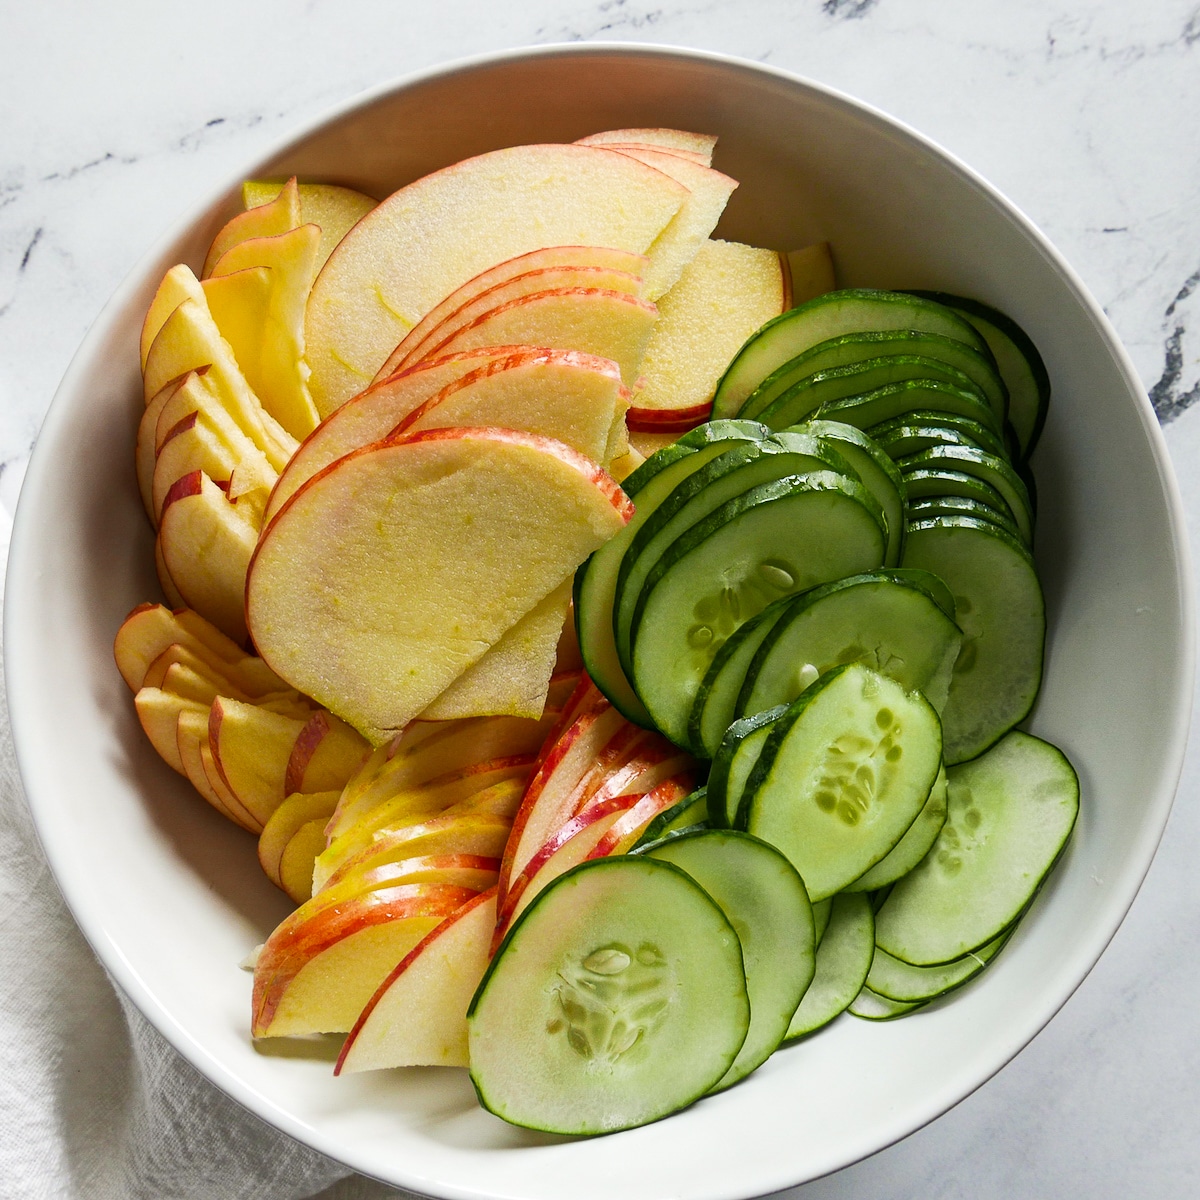 thinly sliced apples and cucumber in a mixing bowl.